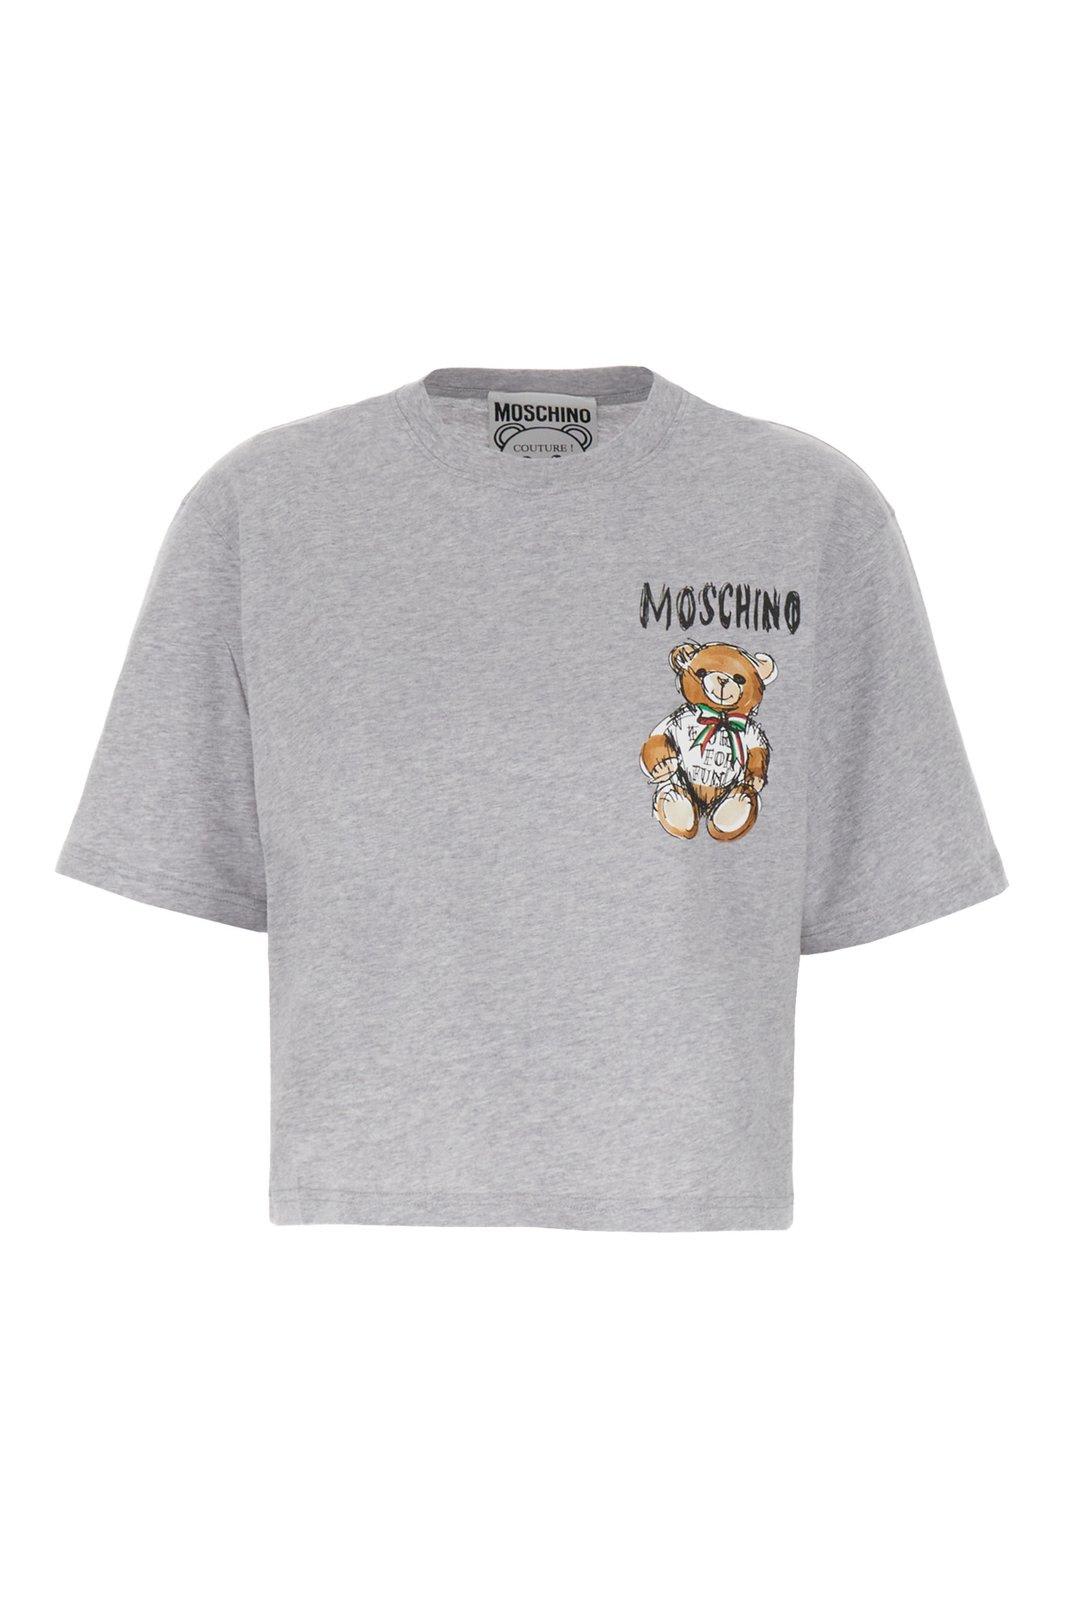 Moschino Teddy Bear Printed Cropped T-shirt In Gray